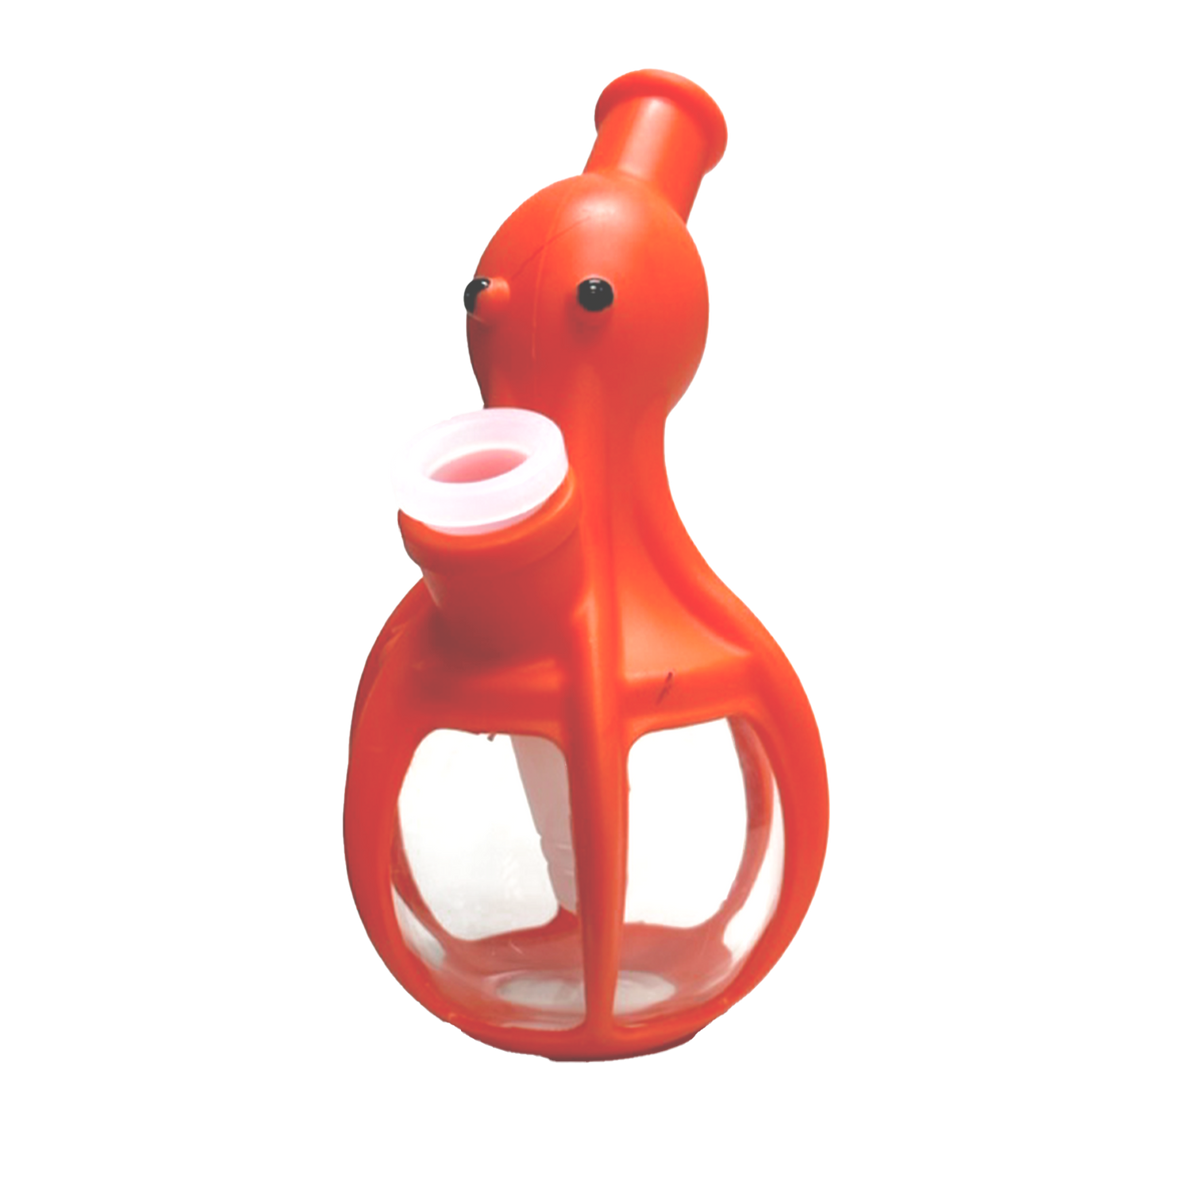 OCTOPUS SILICONE WATER PIPE 14MM MALE BOWL 10CT